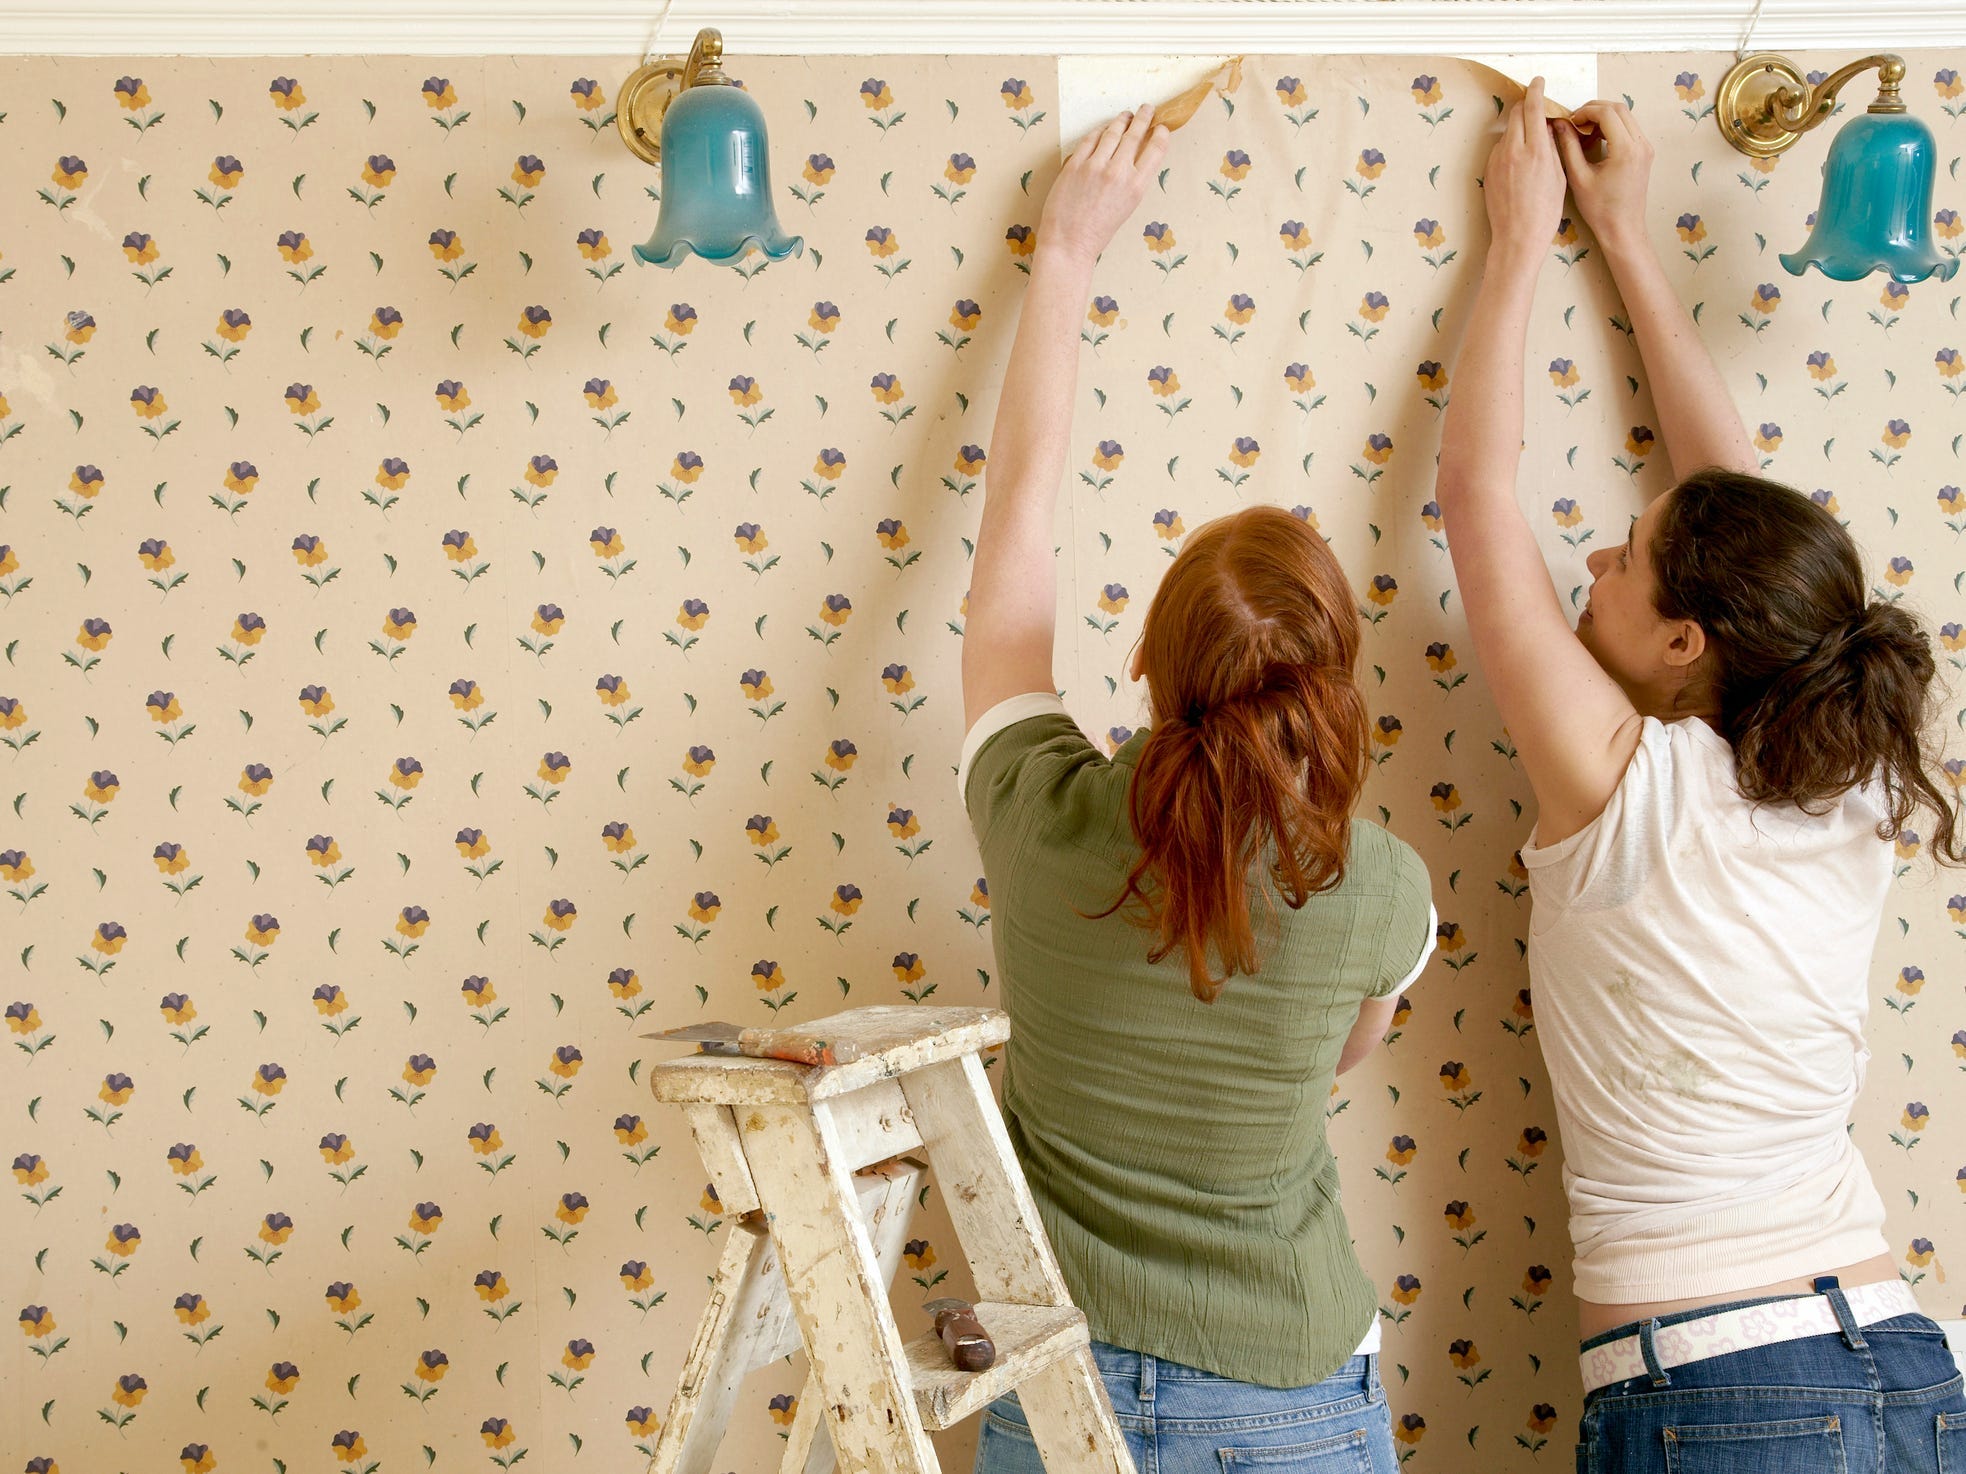 Stripping Ugly Wallpapers: Learn the How-to’s